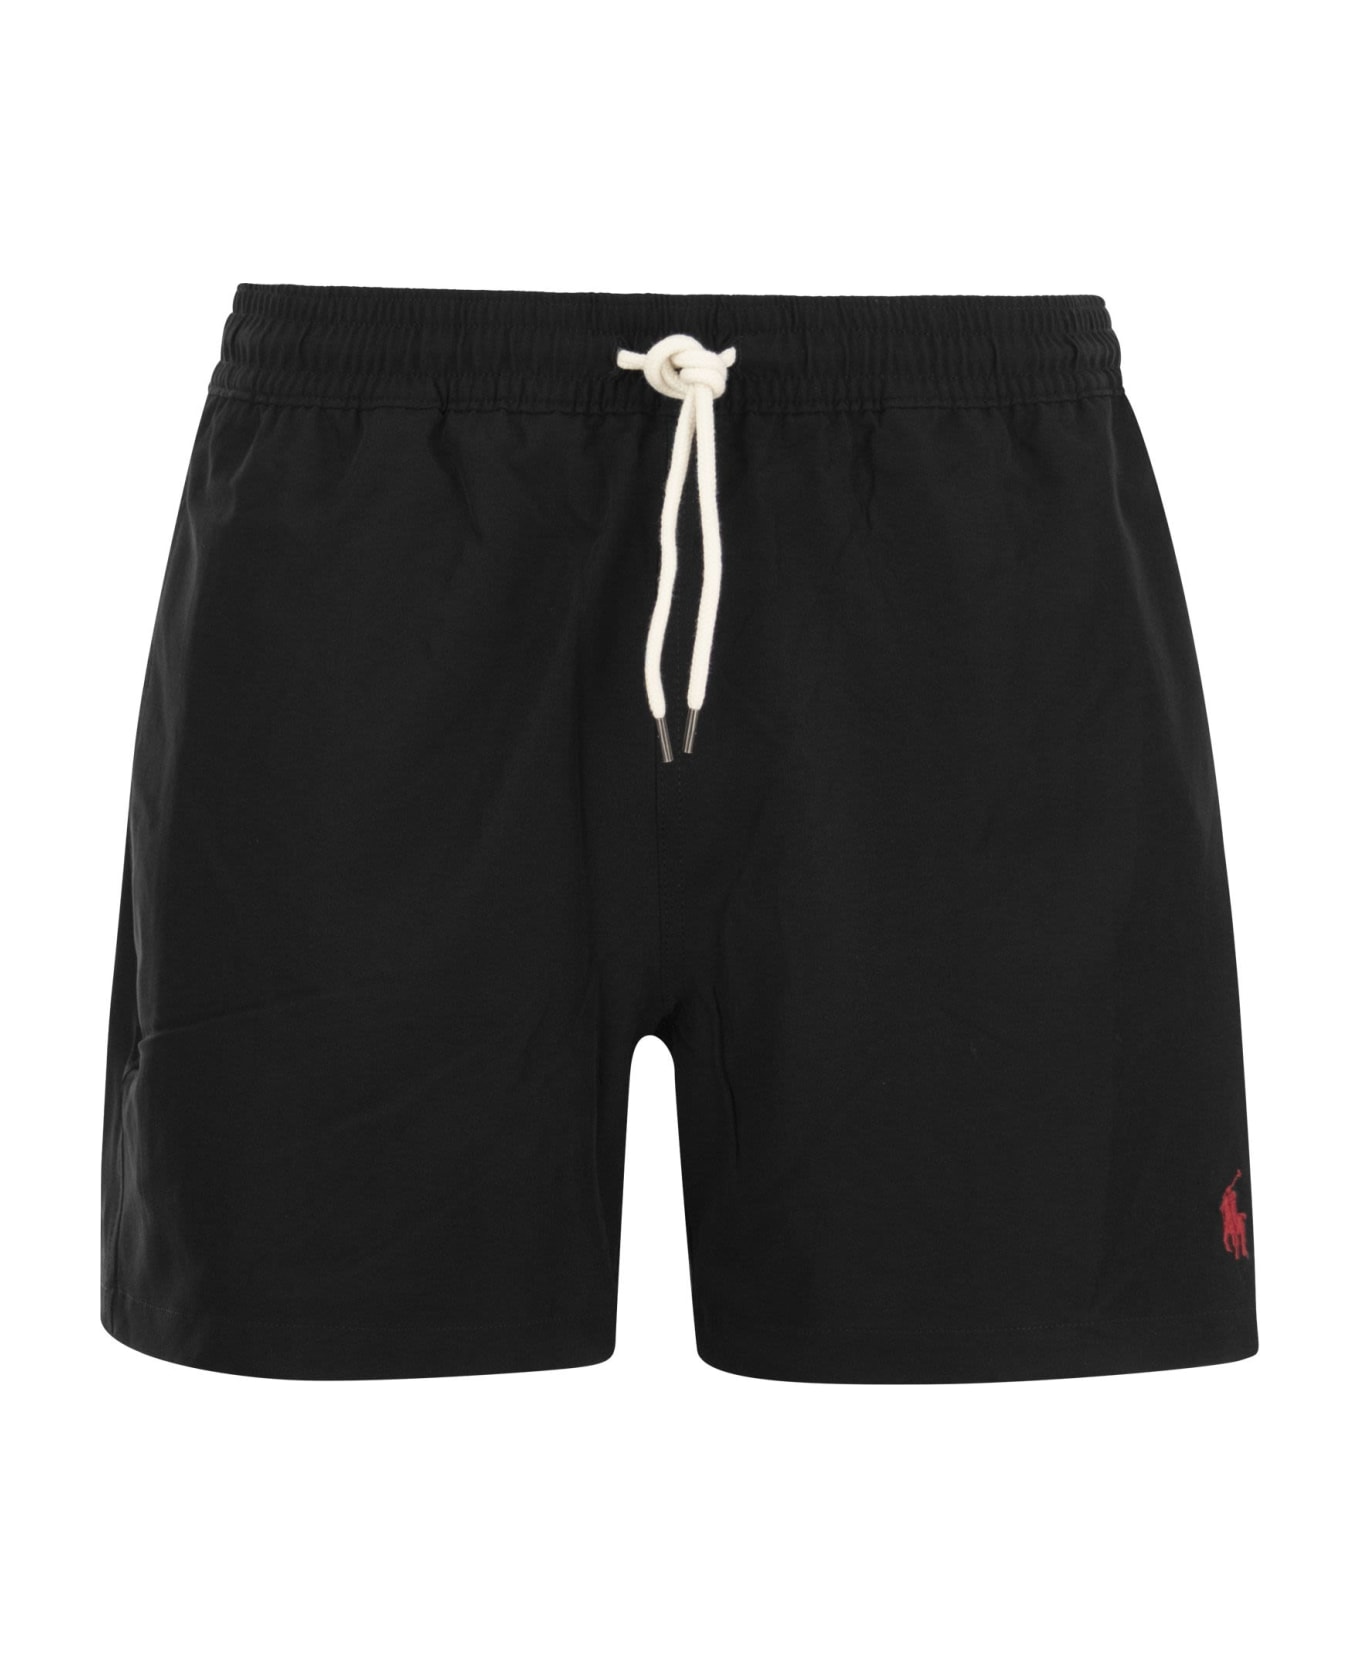 Polo Ralph Lauren Black Stretch Polyester Swimming Shorts - POLOBLK